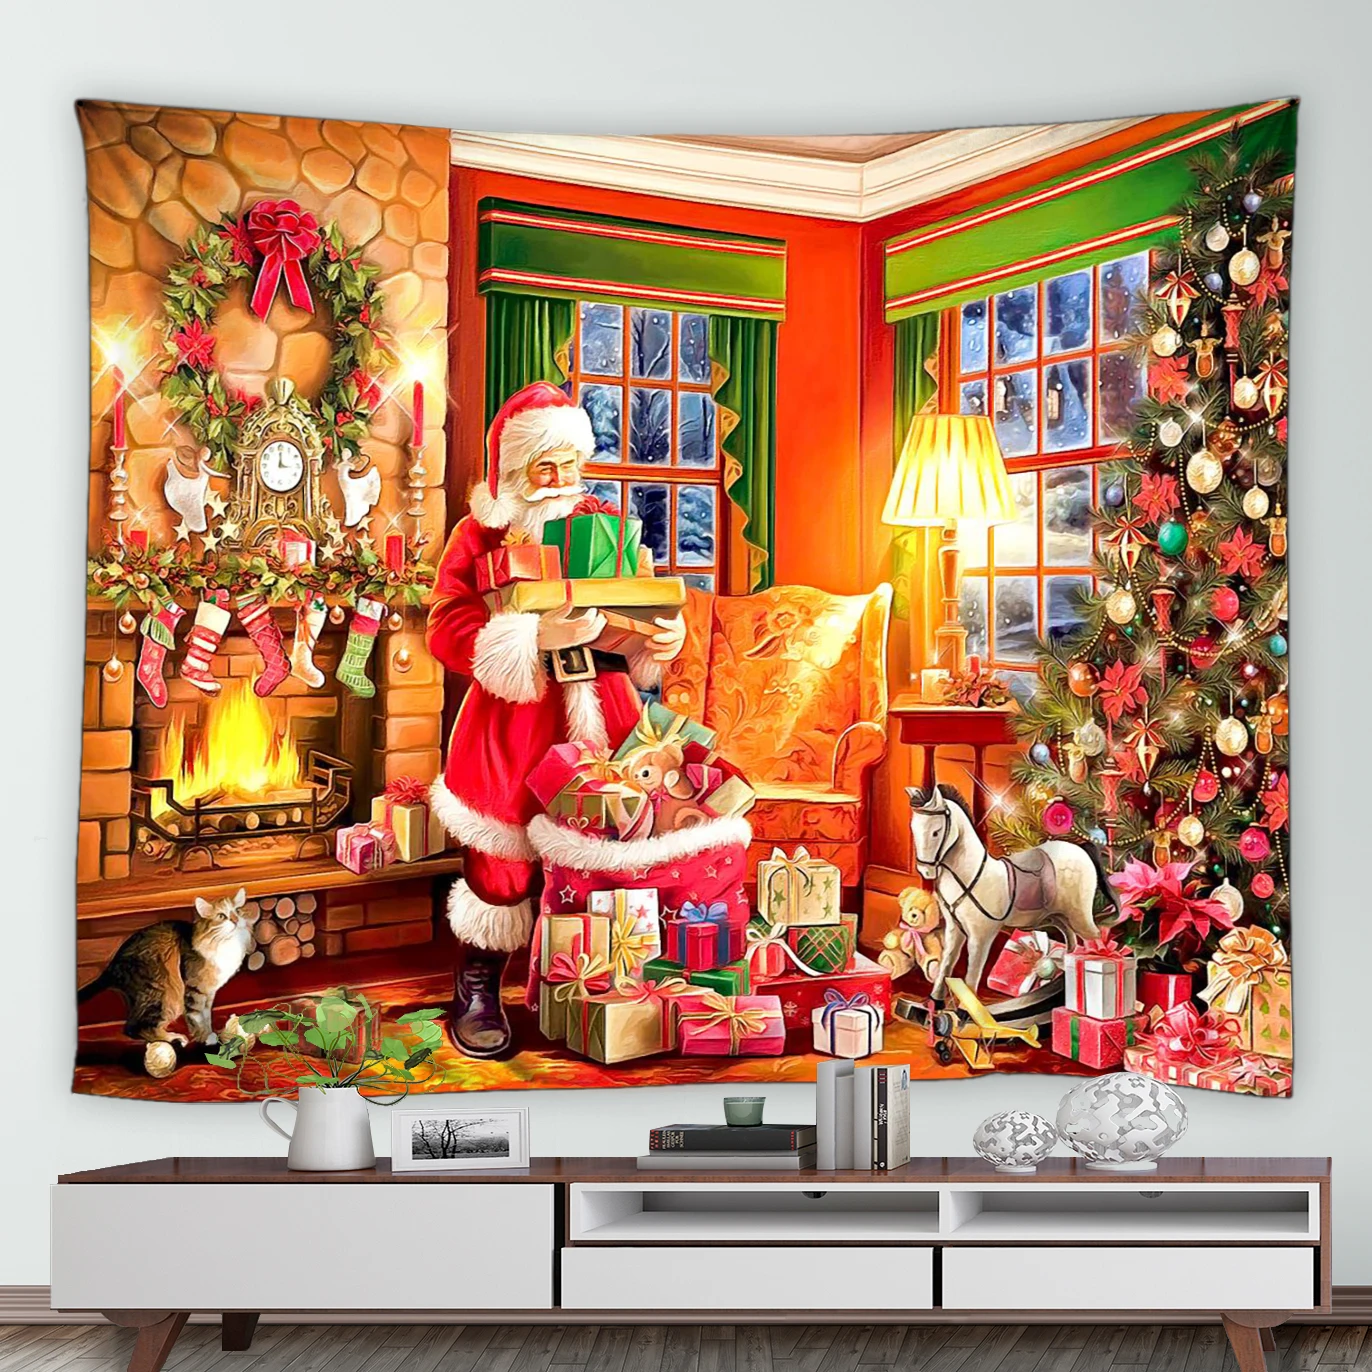 

Christmas House Tapestry Santa Claus Gifts Fireplace Xmas Tree Home New Year Wall Hanging Retro Oil Painting Mural Tapestries